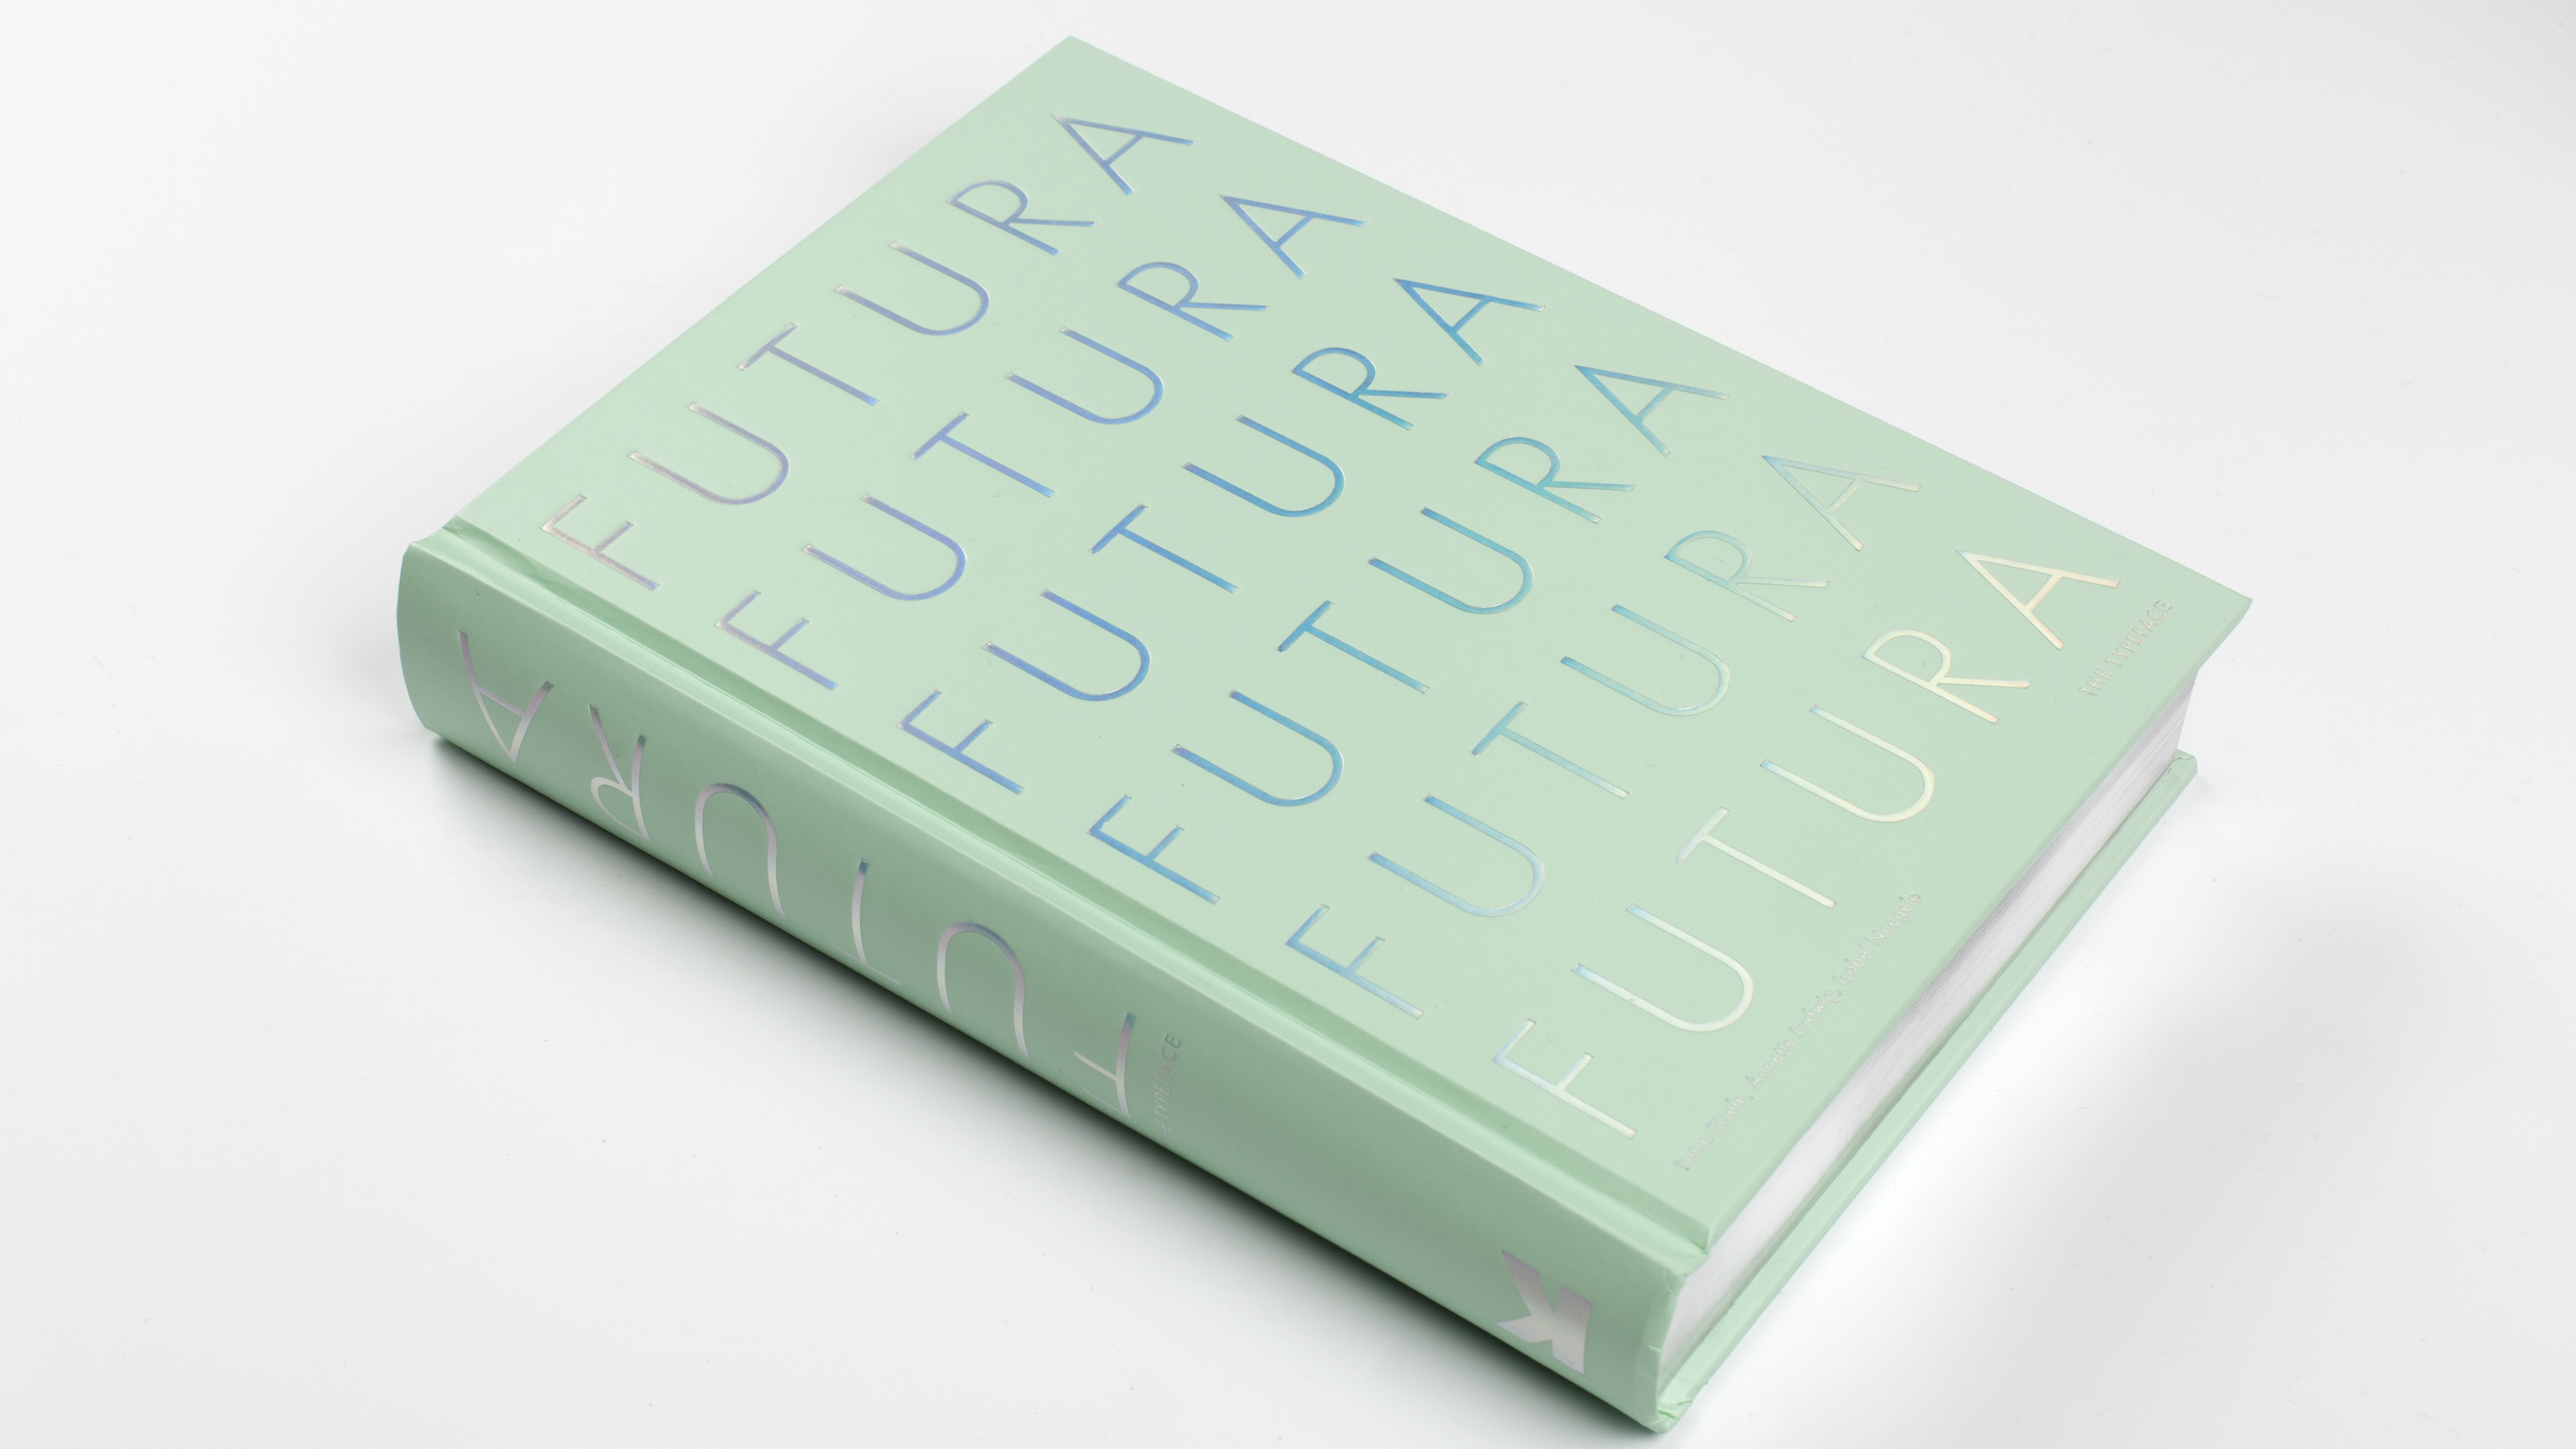 The cover of Futura: The Typeface, one of the best graphic design books